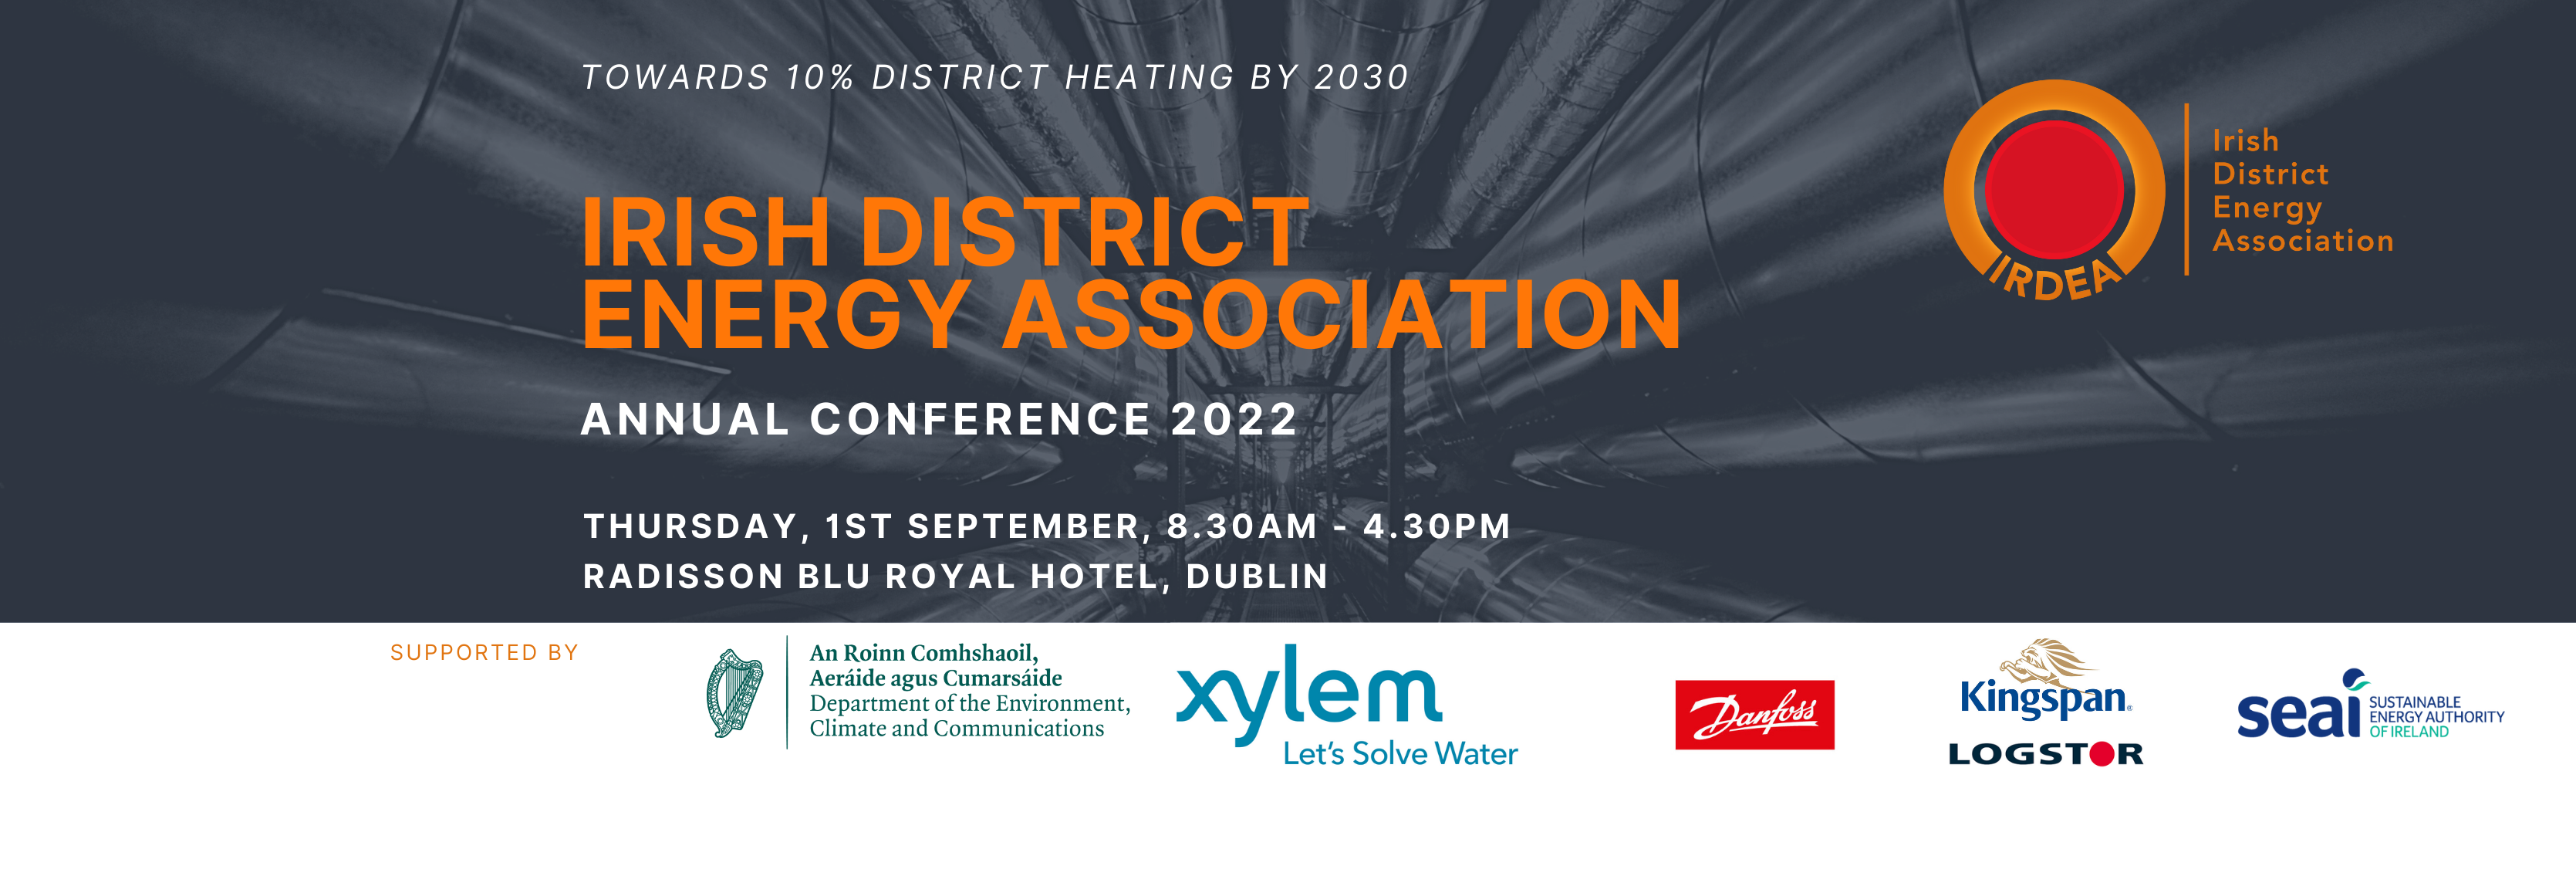 Irish District Energy Association Annual Conference 2022